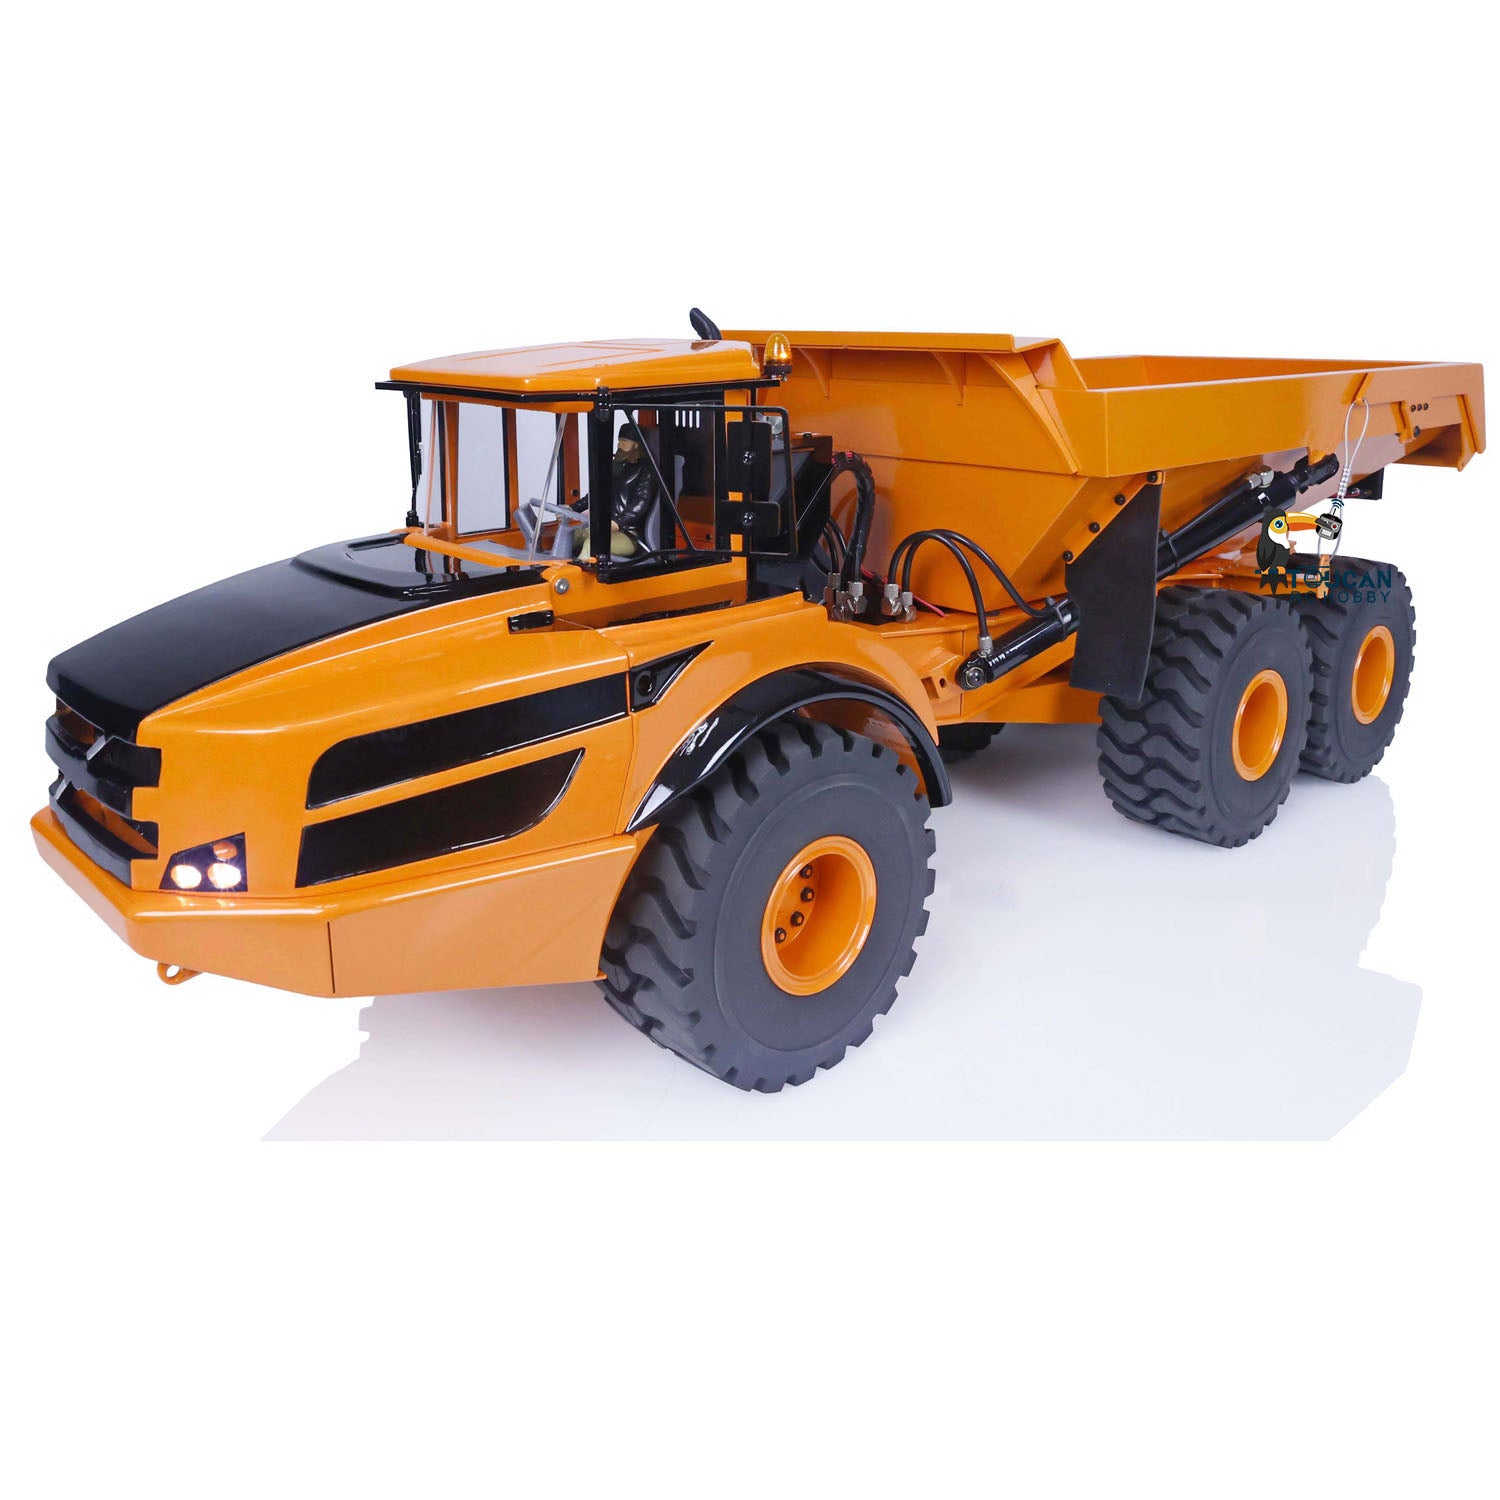 Double E 1/14 Hydraulic RC Dump Truck 6x6 FMX Remote Control Dumper Cars  Hobby Model DIY RTR Toy Gift for Adults Children